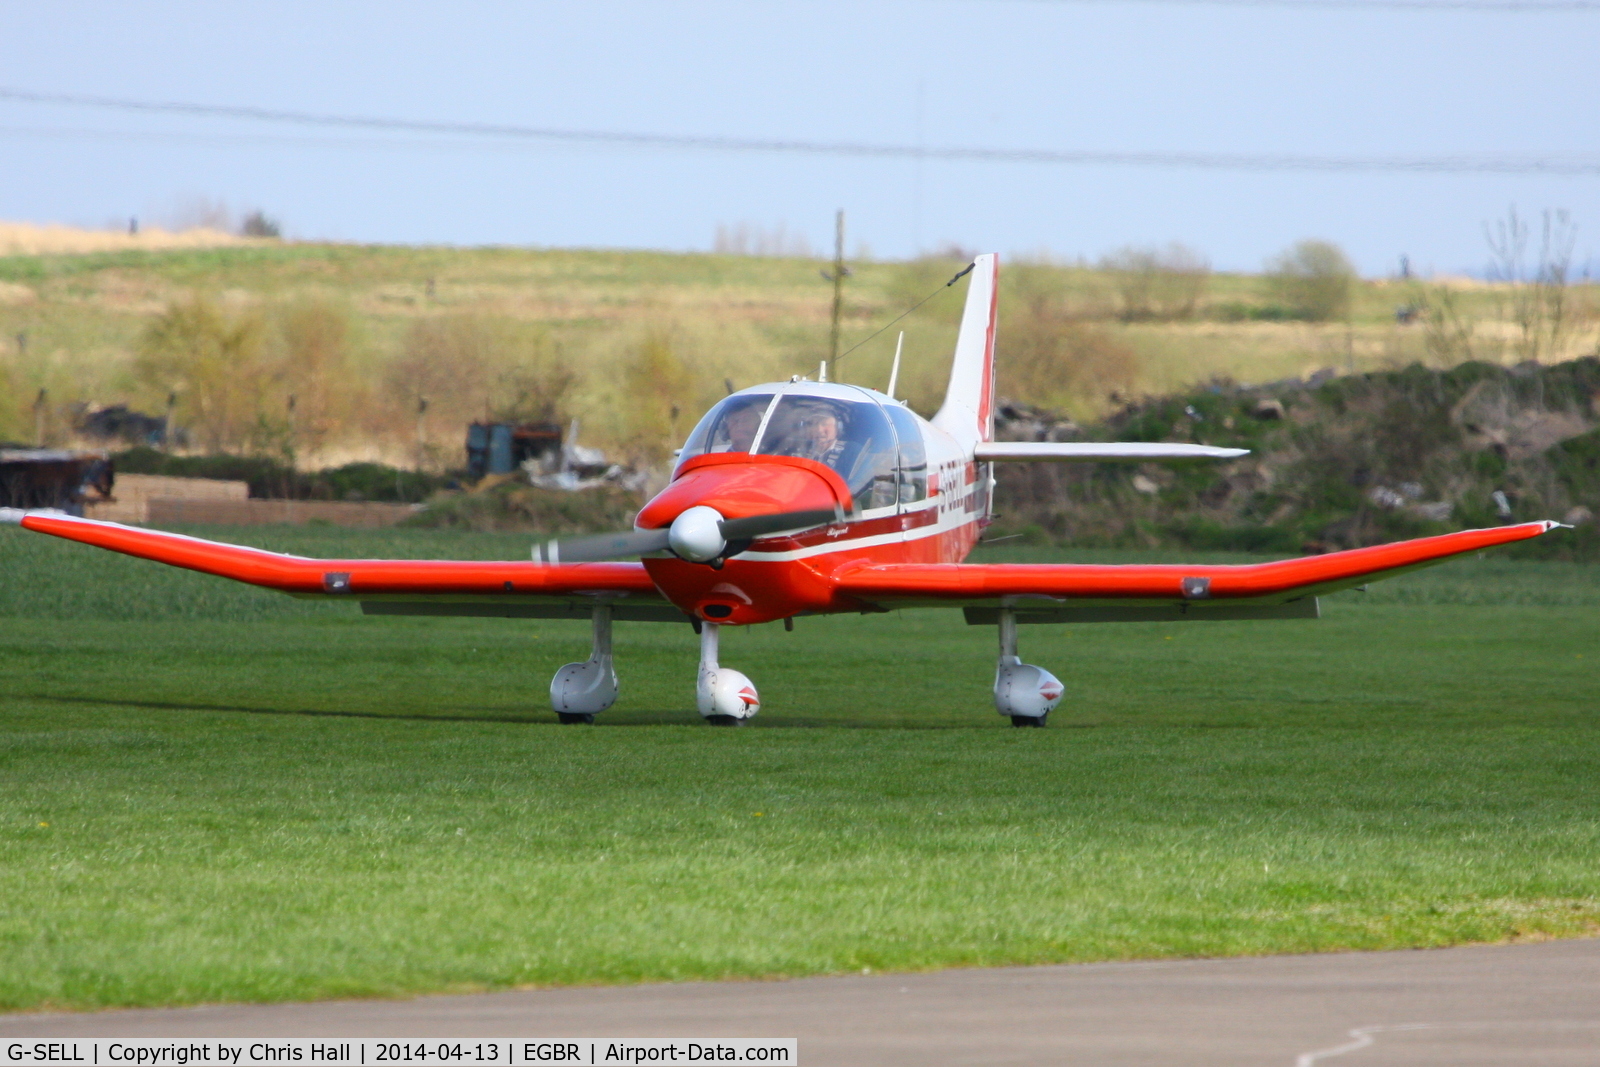 G-SELL, 1976 Robin DR-400-180 Regent Regent C/N 1153, at Breighton's 'Early Bird' Fly-in 13/04/14